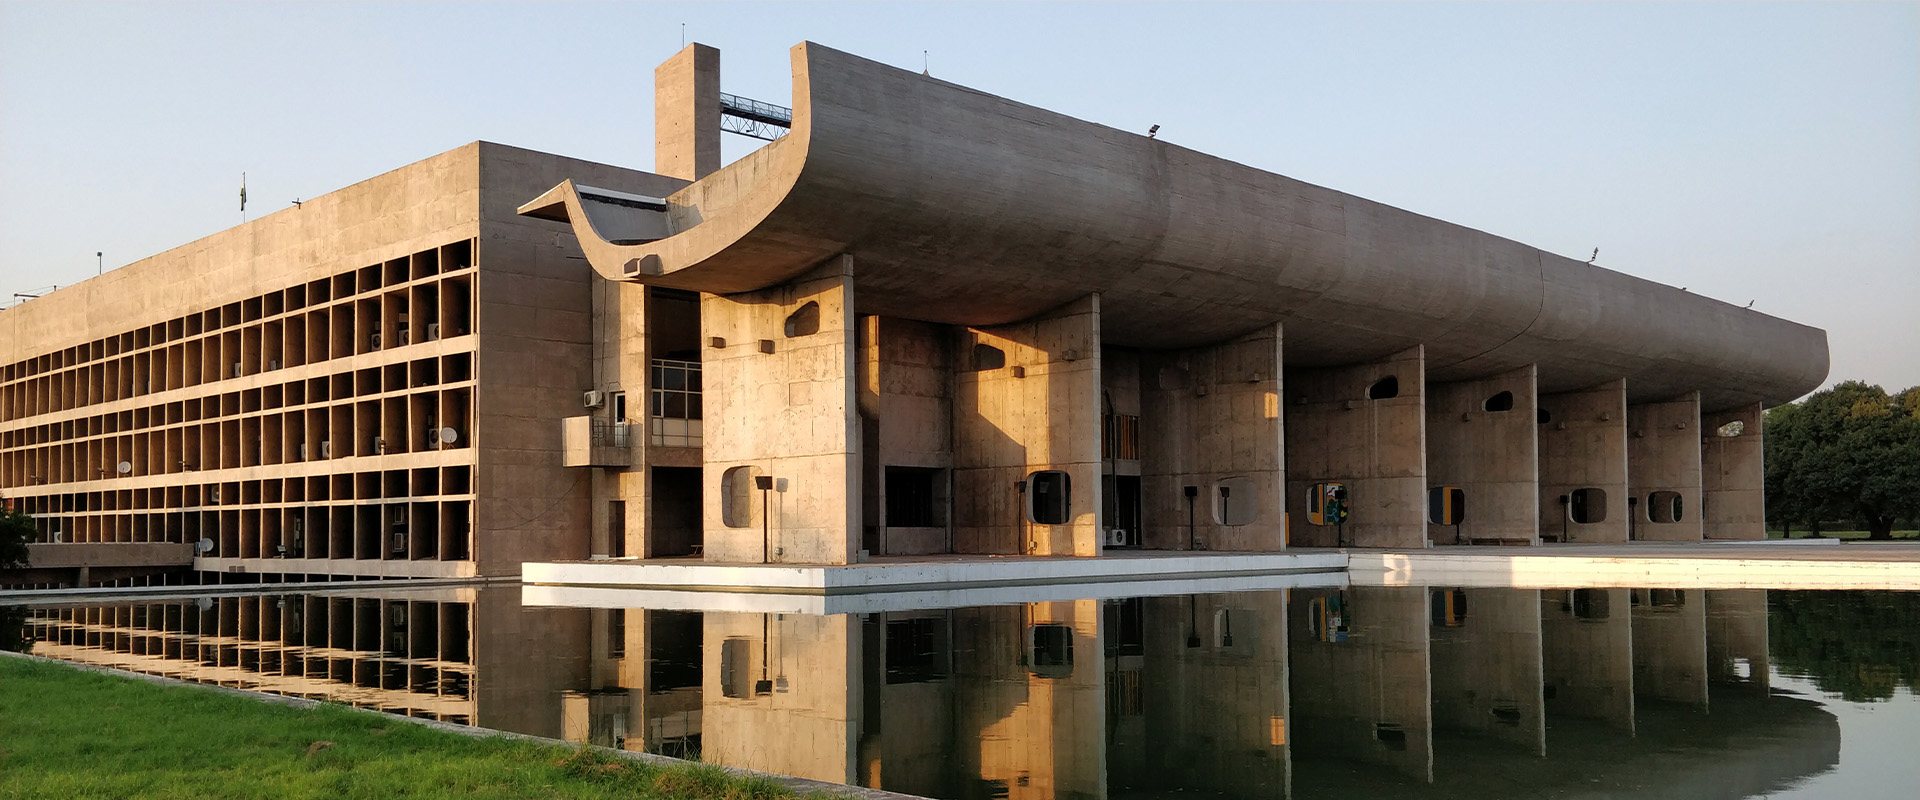 MDWFF: The Power of Utopia – Living with Le Corbusier in 